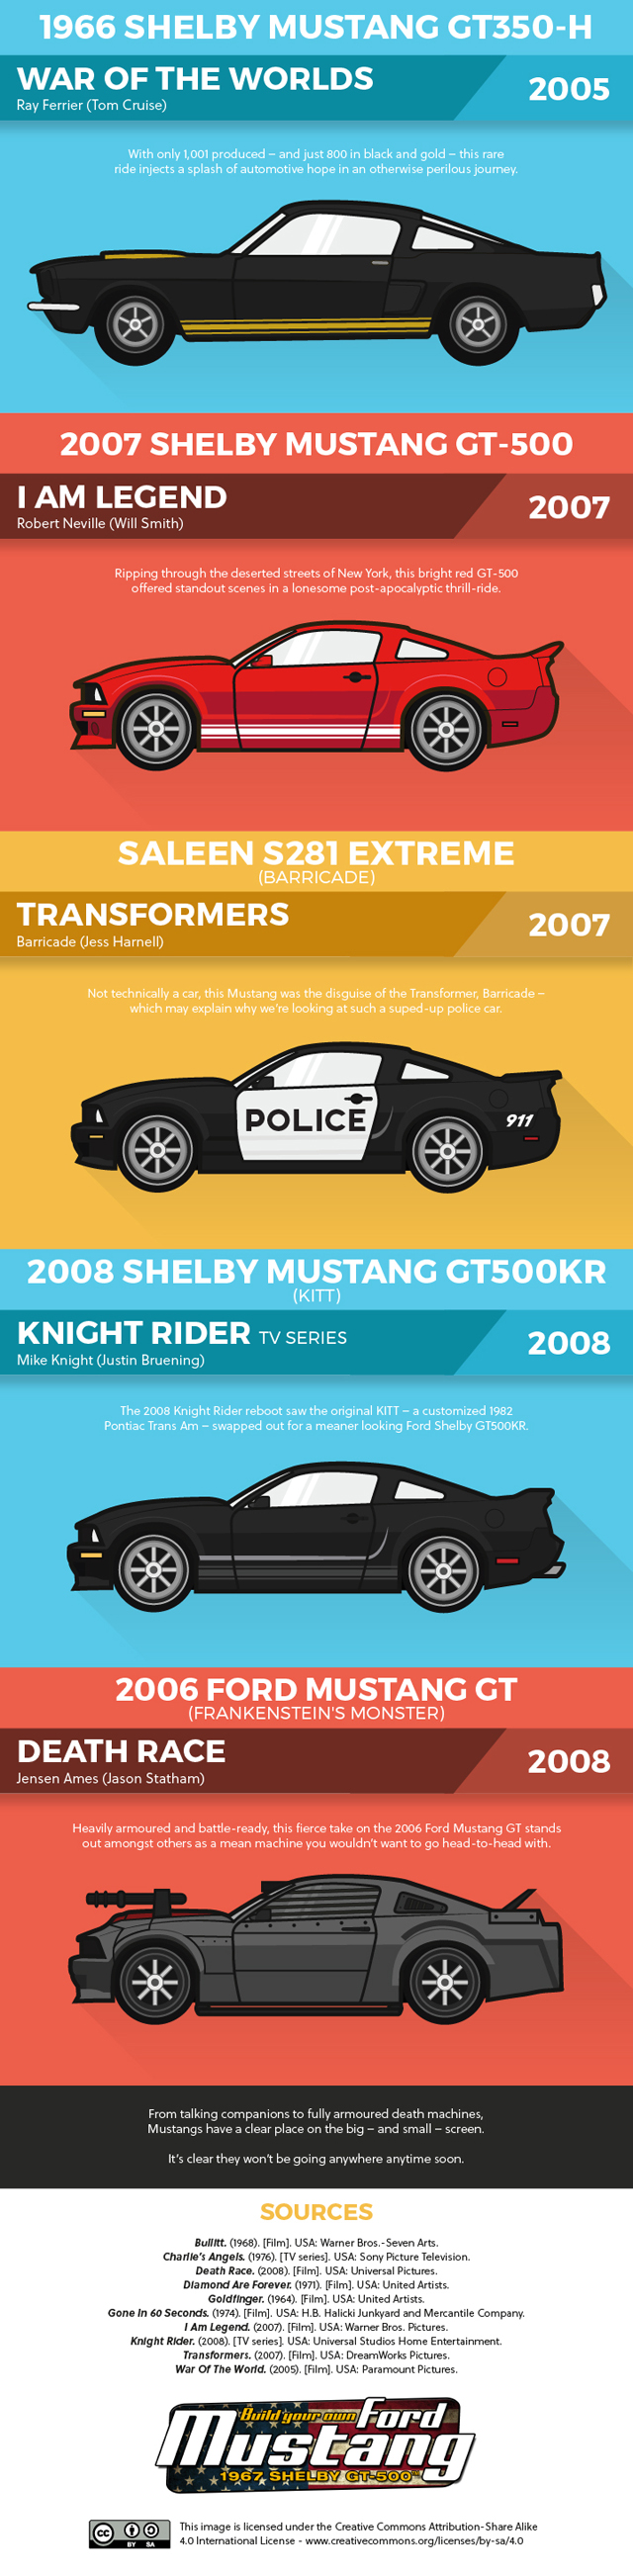 The Most Iconic Mustangs In Film